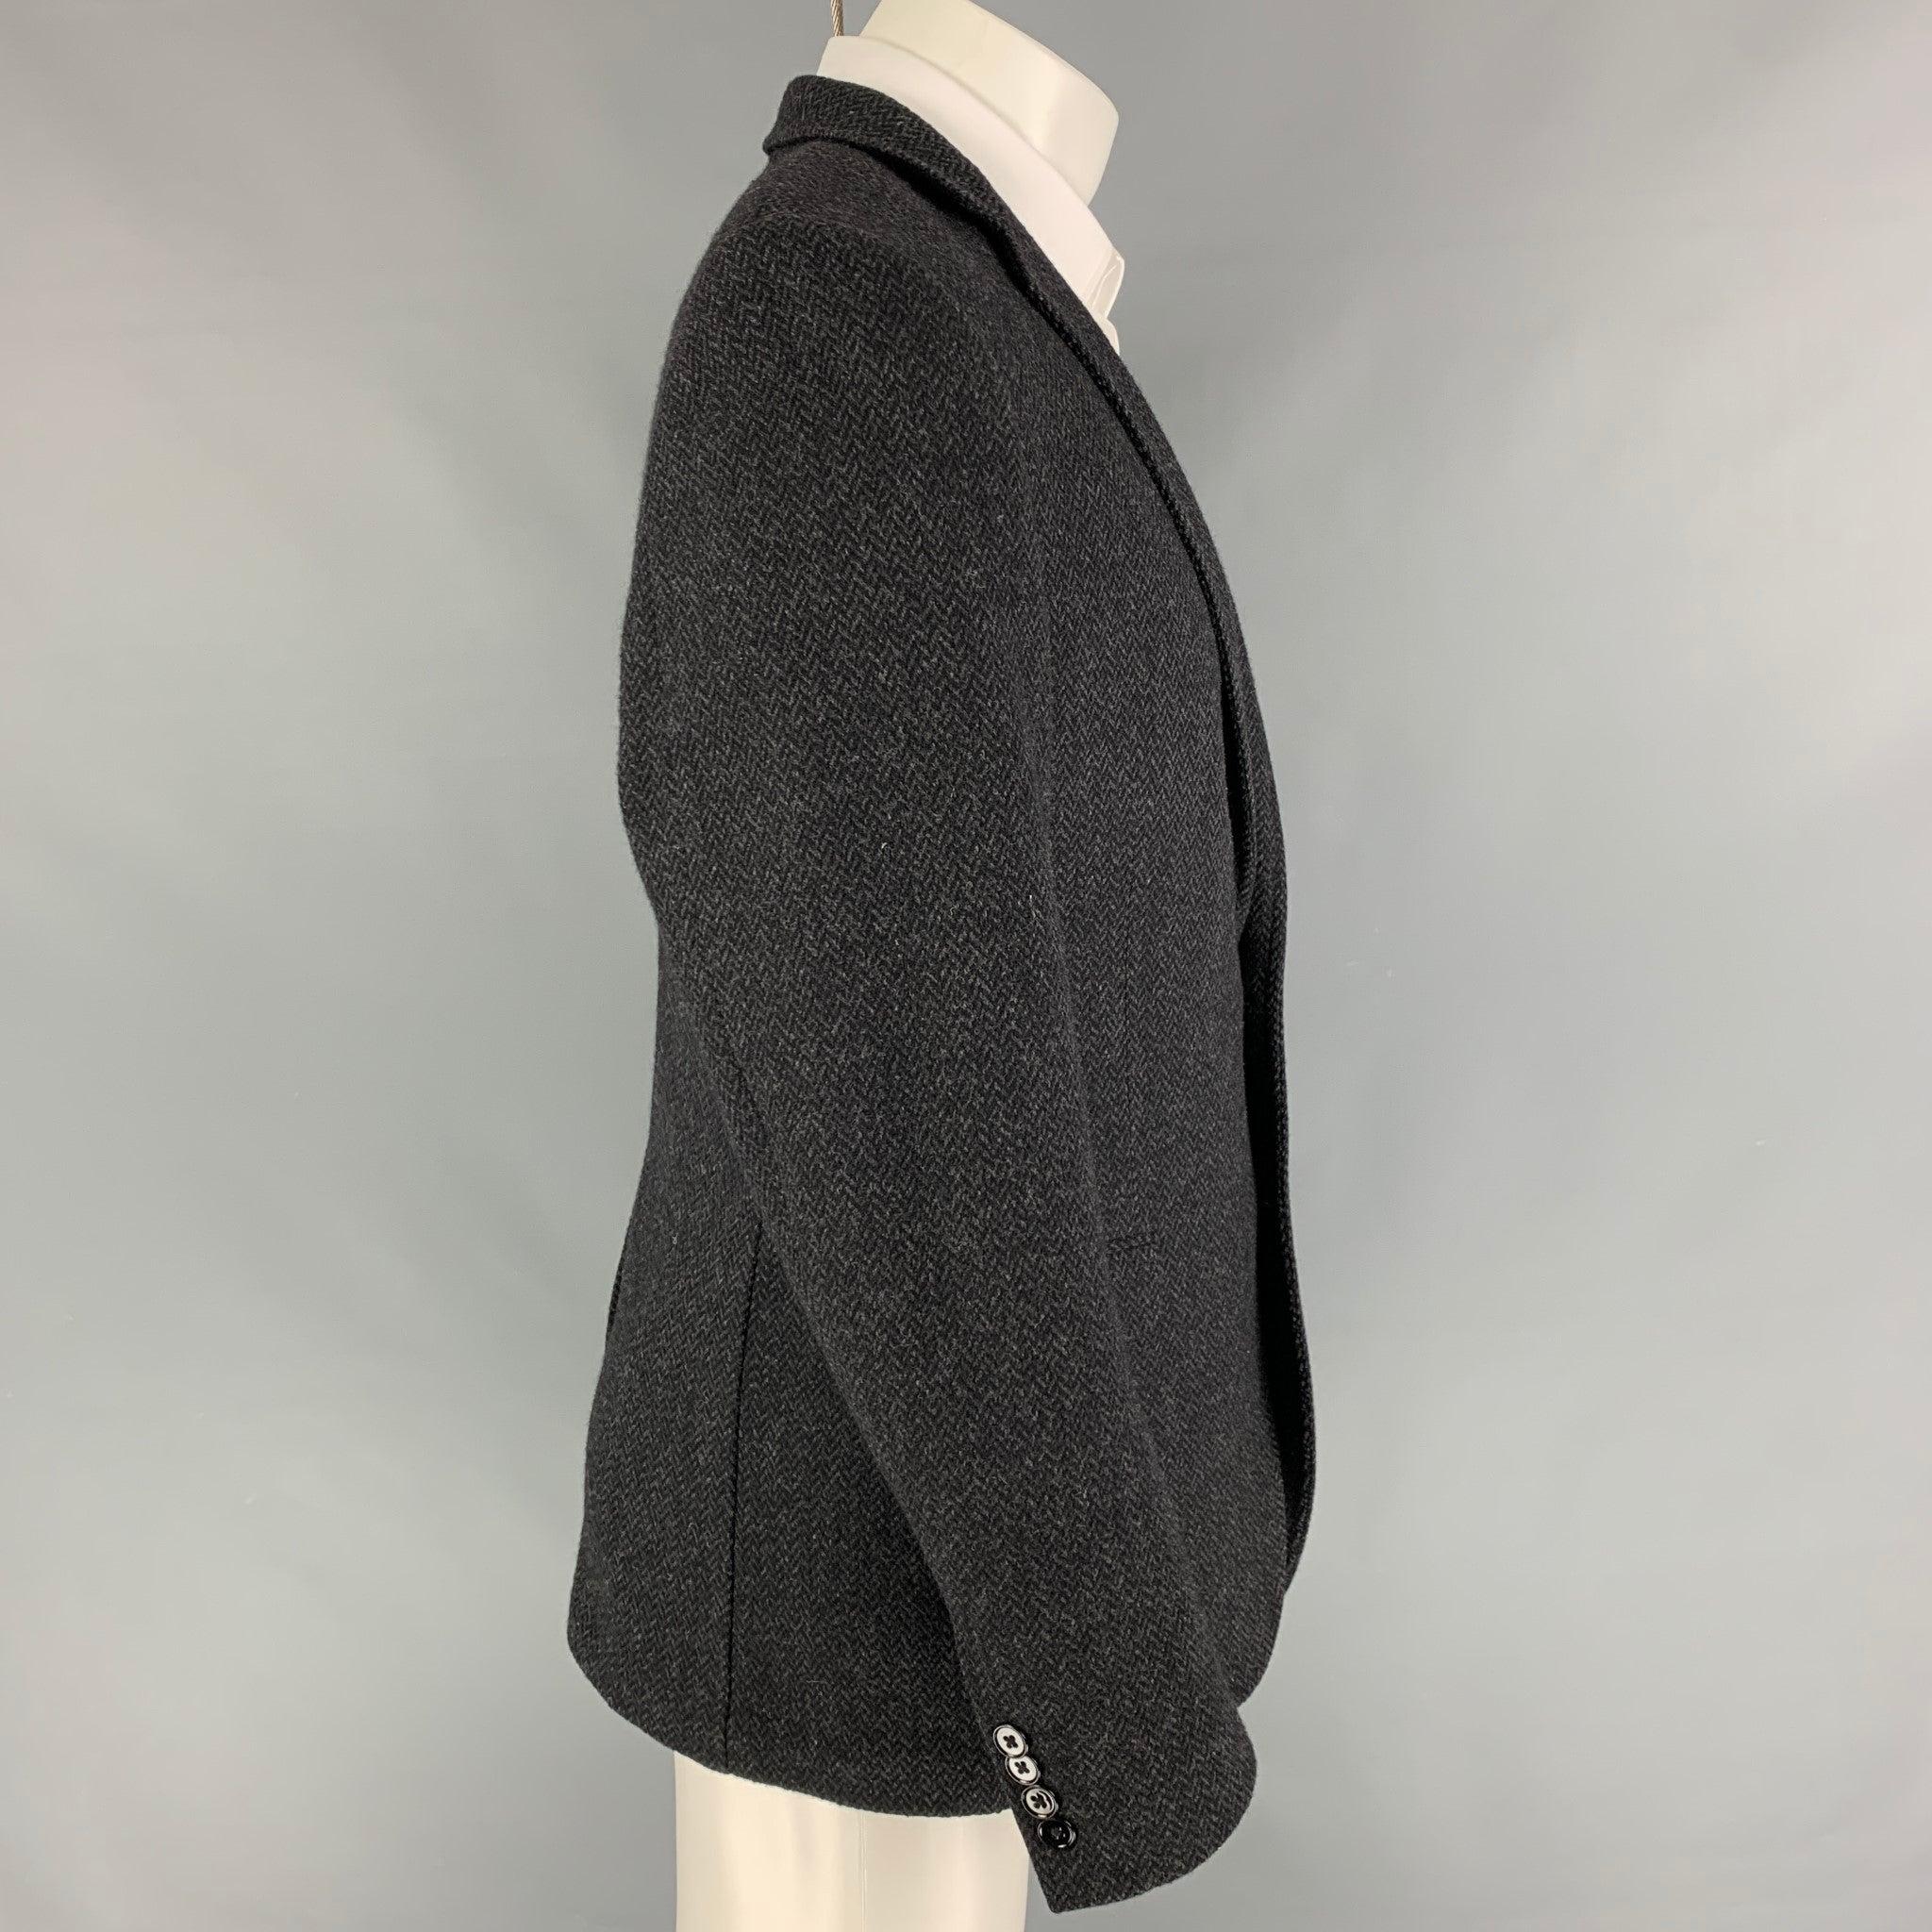 DOLCE & GABBANA sport coat comes in a grey cashmere with a half liner featuring a notch lapel, flap pockets, single back vent, and a double button closure. Made in Italy.
Very Good
Pre-Owned Condition.  

Marked:   50 

Measurements: 
 
Shoulder: 18